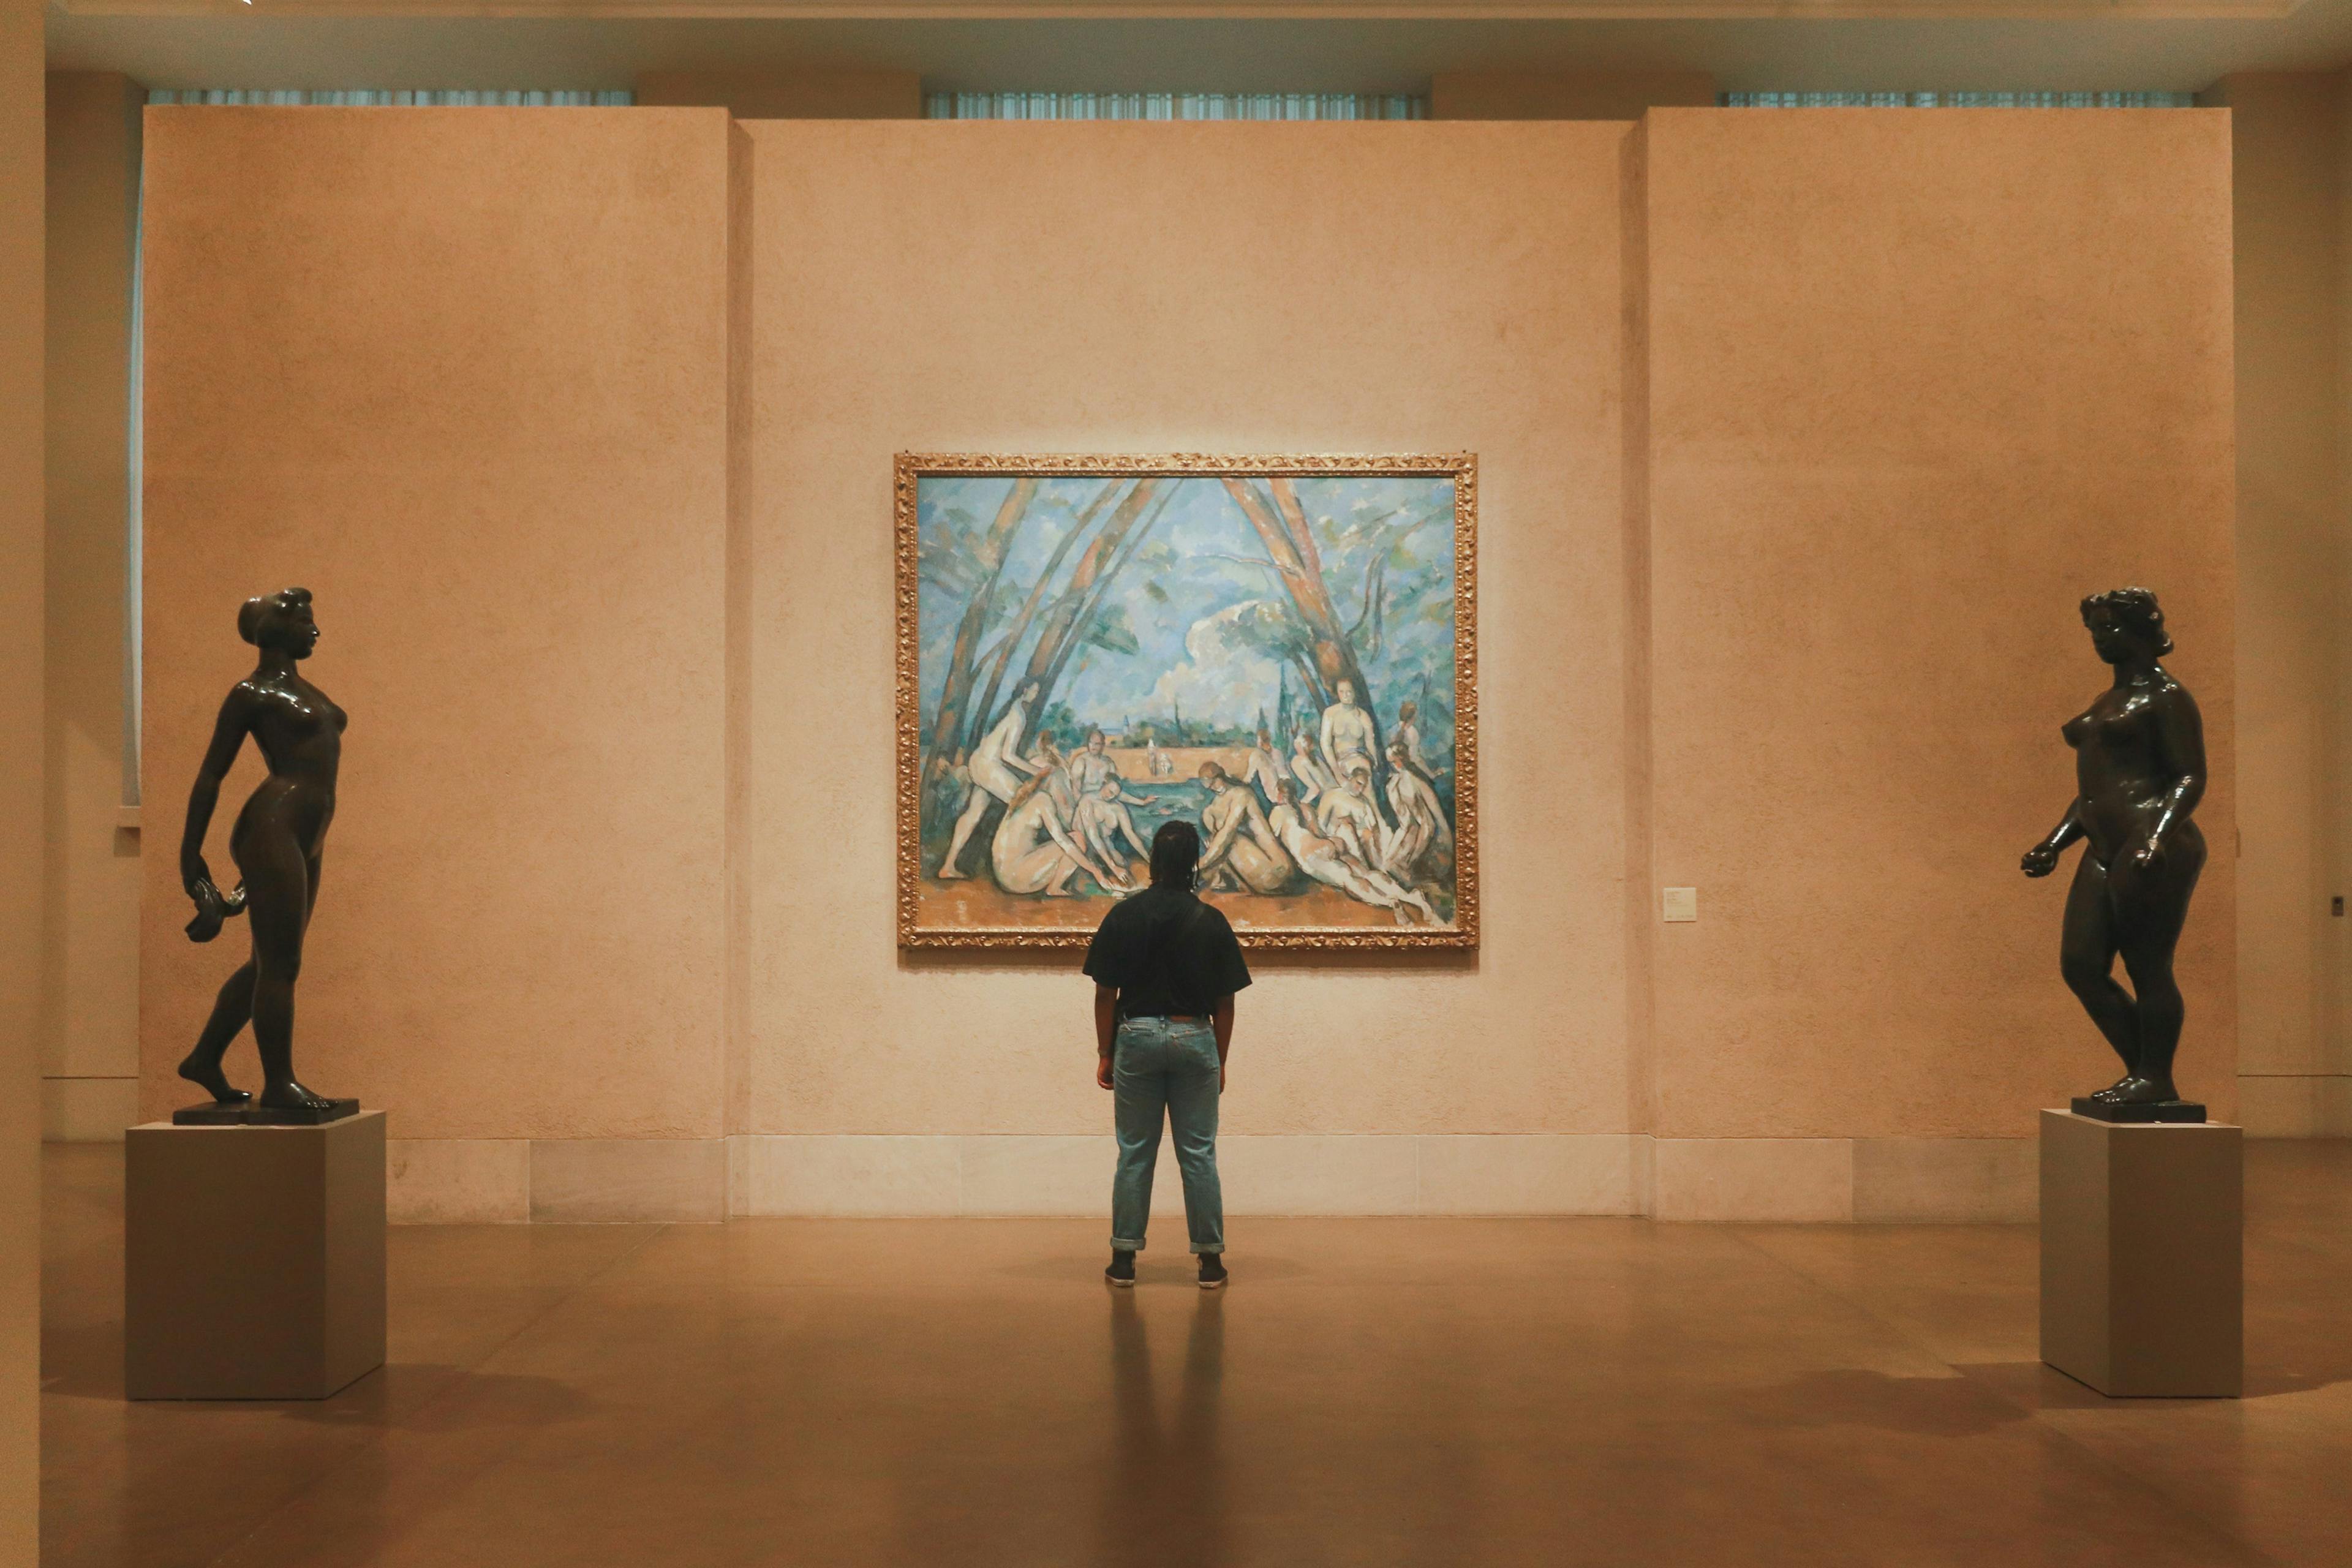 Man standing in front of artwork at the Philadelphia Museum of Art.